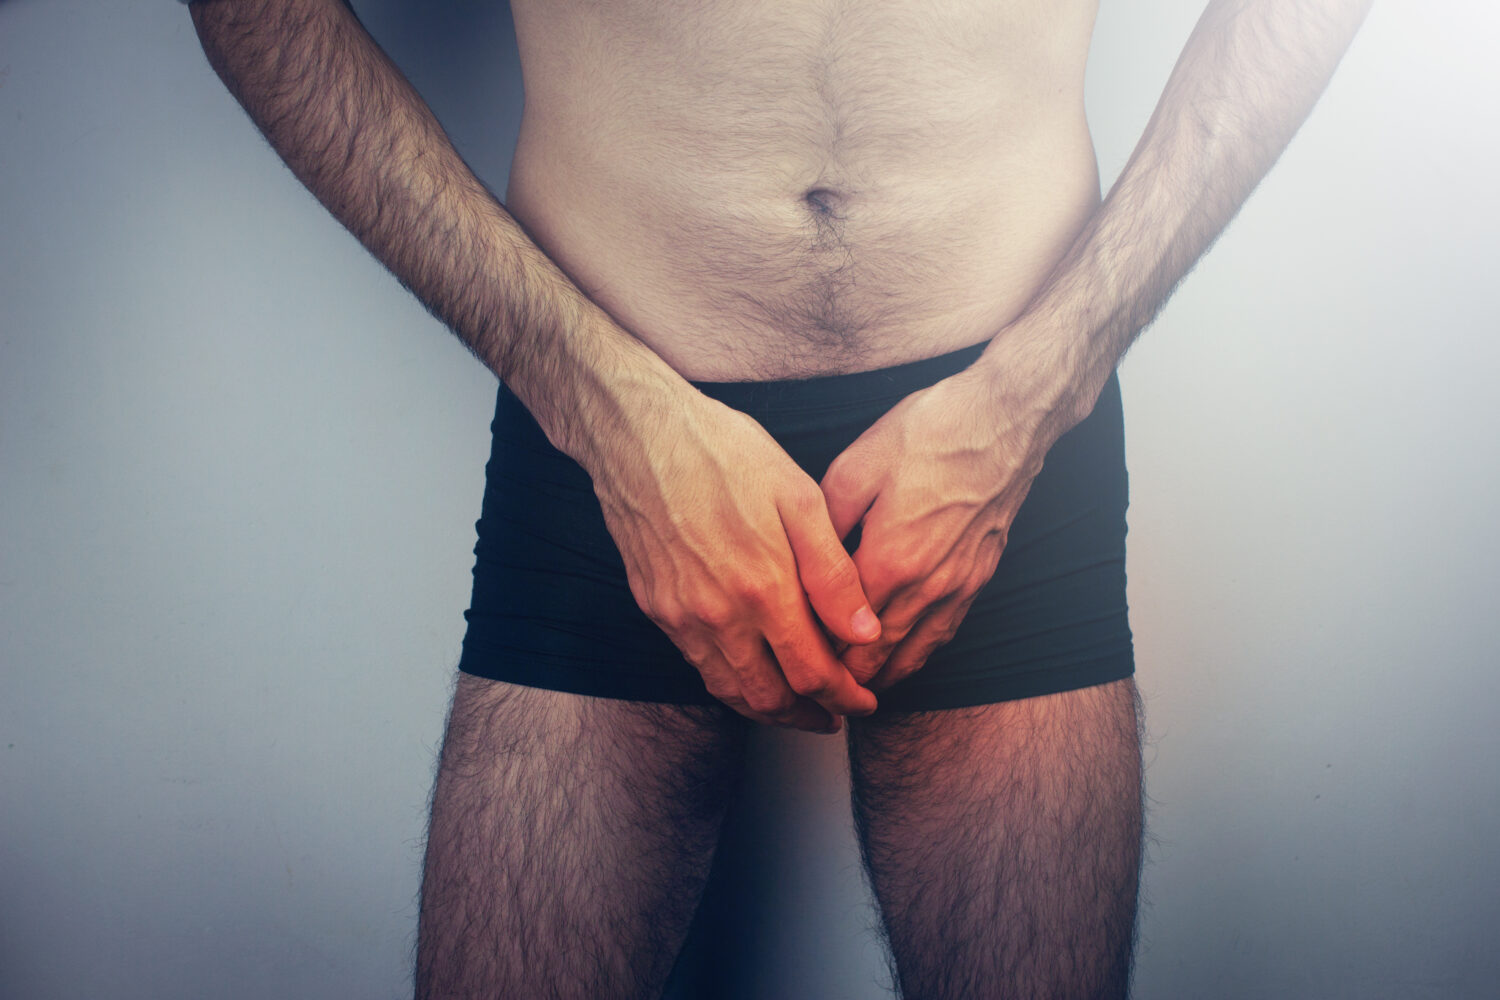 Feeling Sexy? Beware of New Drug-Resistant Gonorrhea Strain